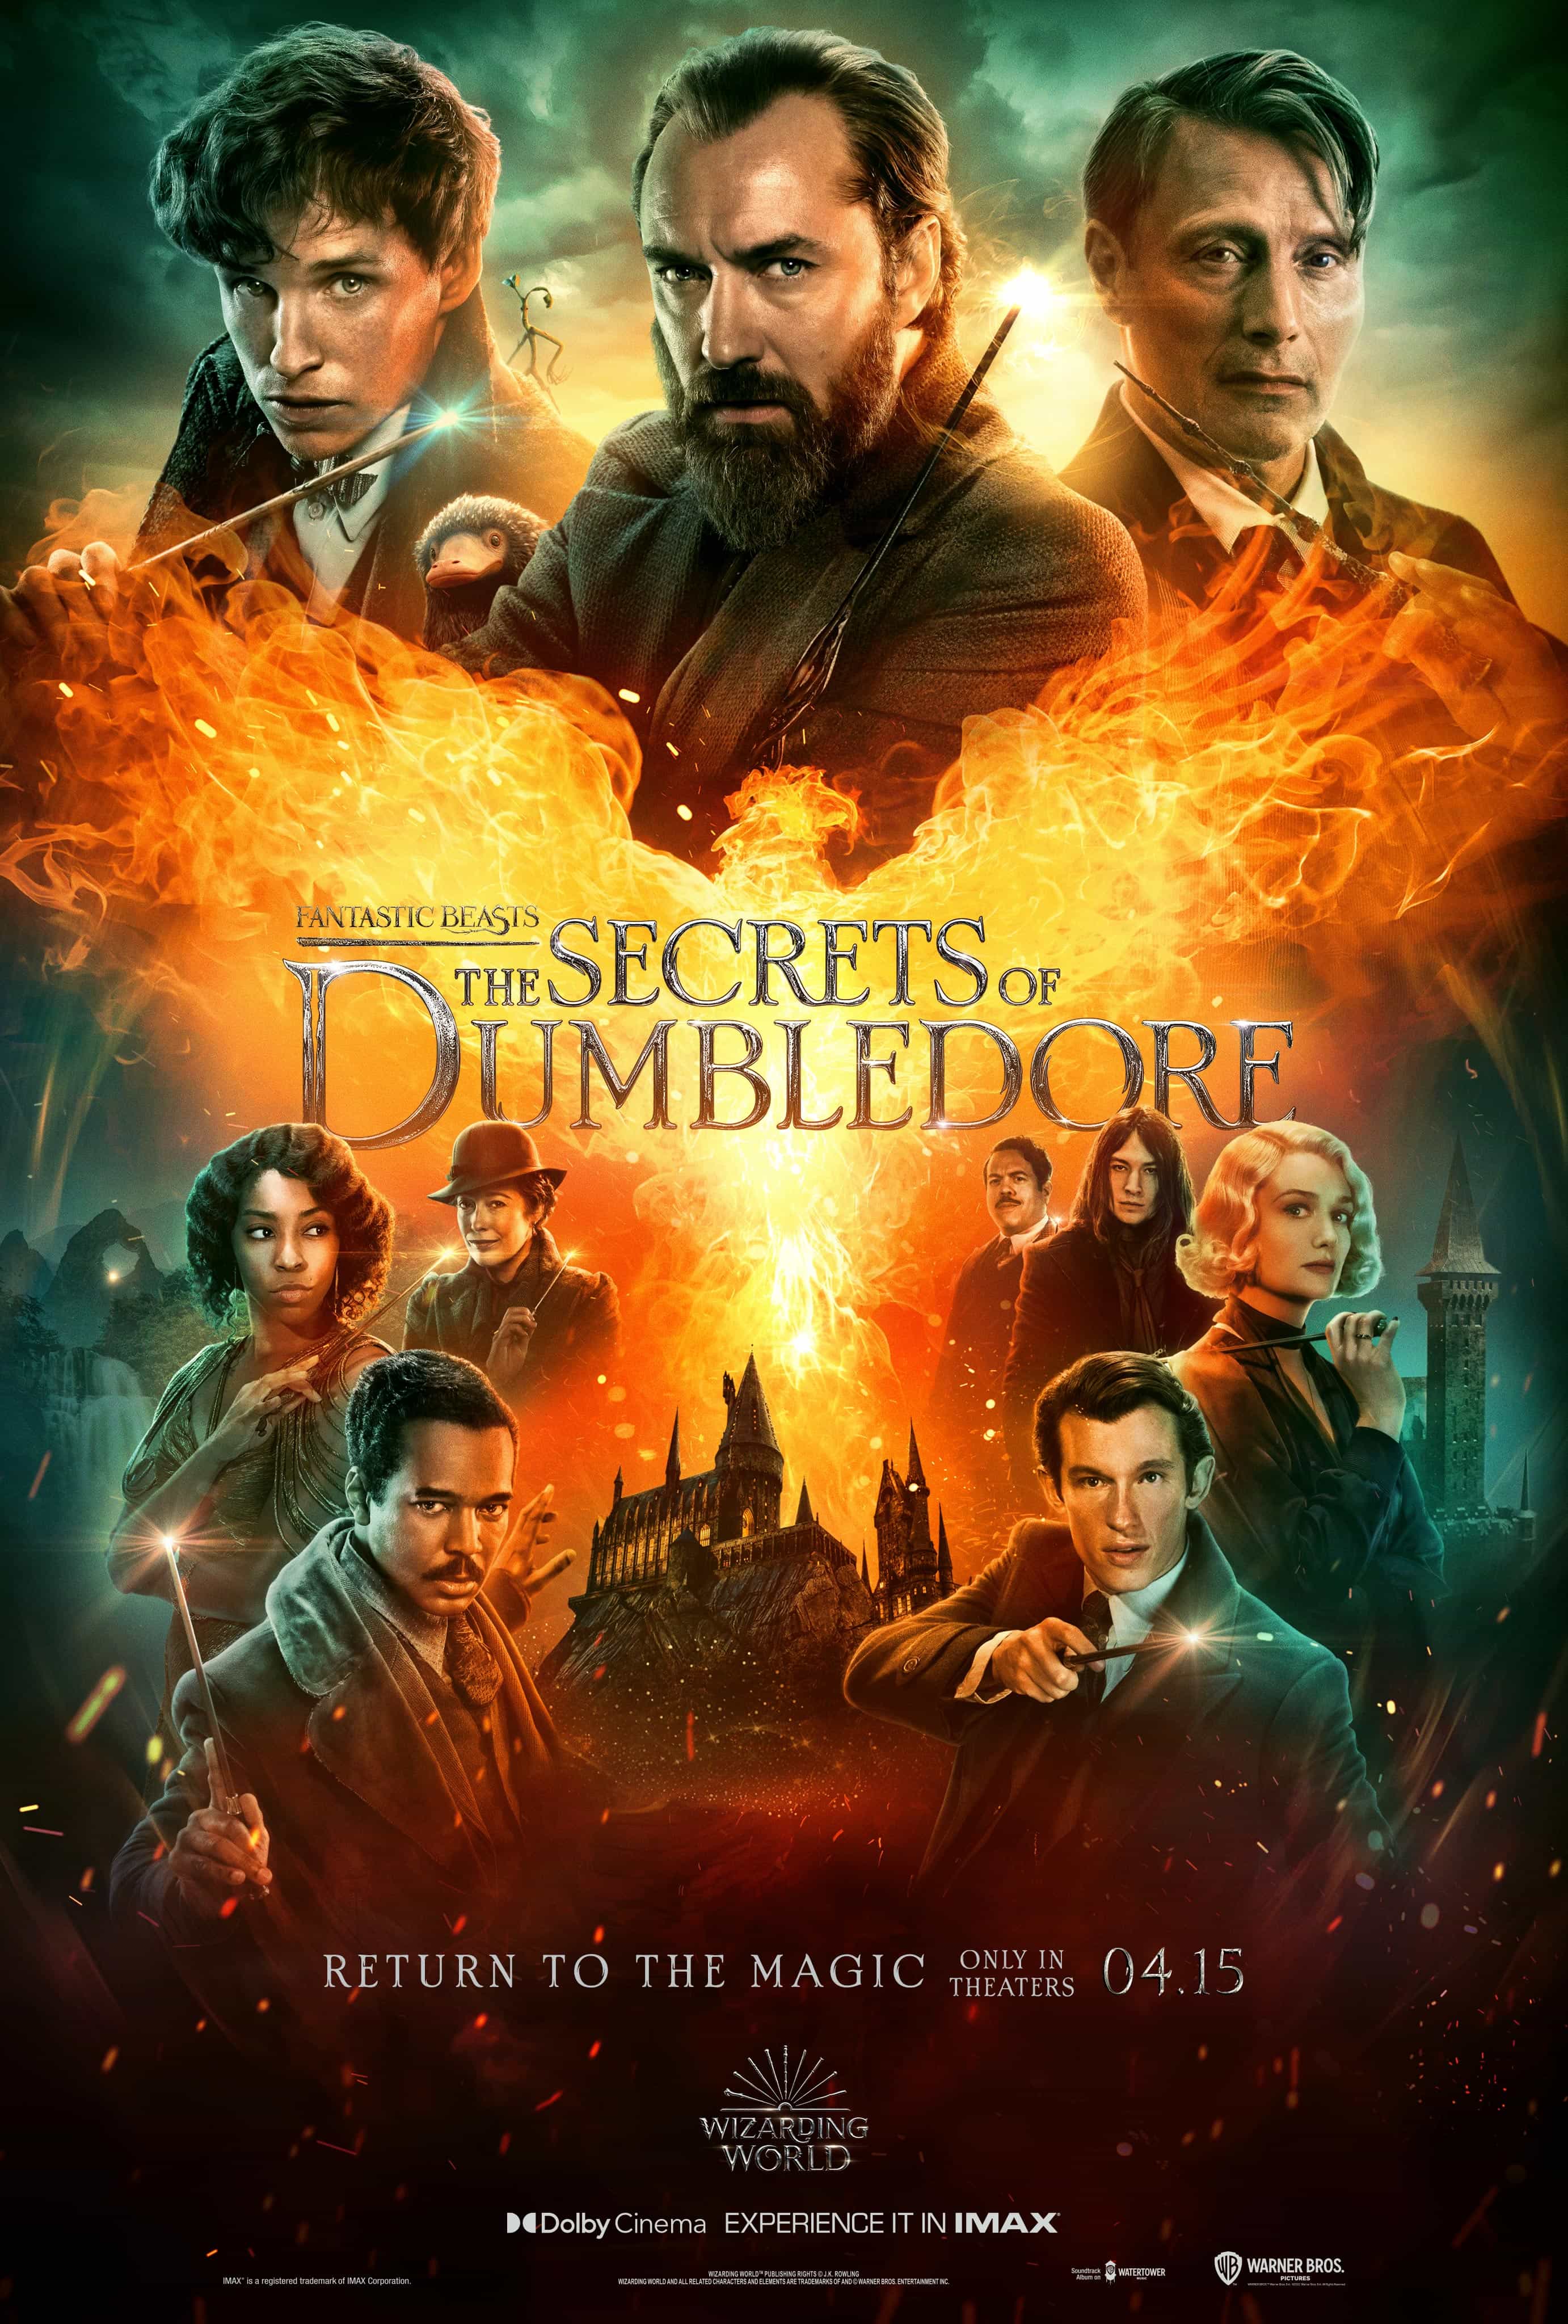 Fantastic Beasts: The Secrets of Dumbledore is given a 12A age rating in the UK for moderate fantasy threat, brief bloody images